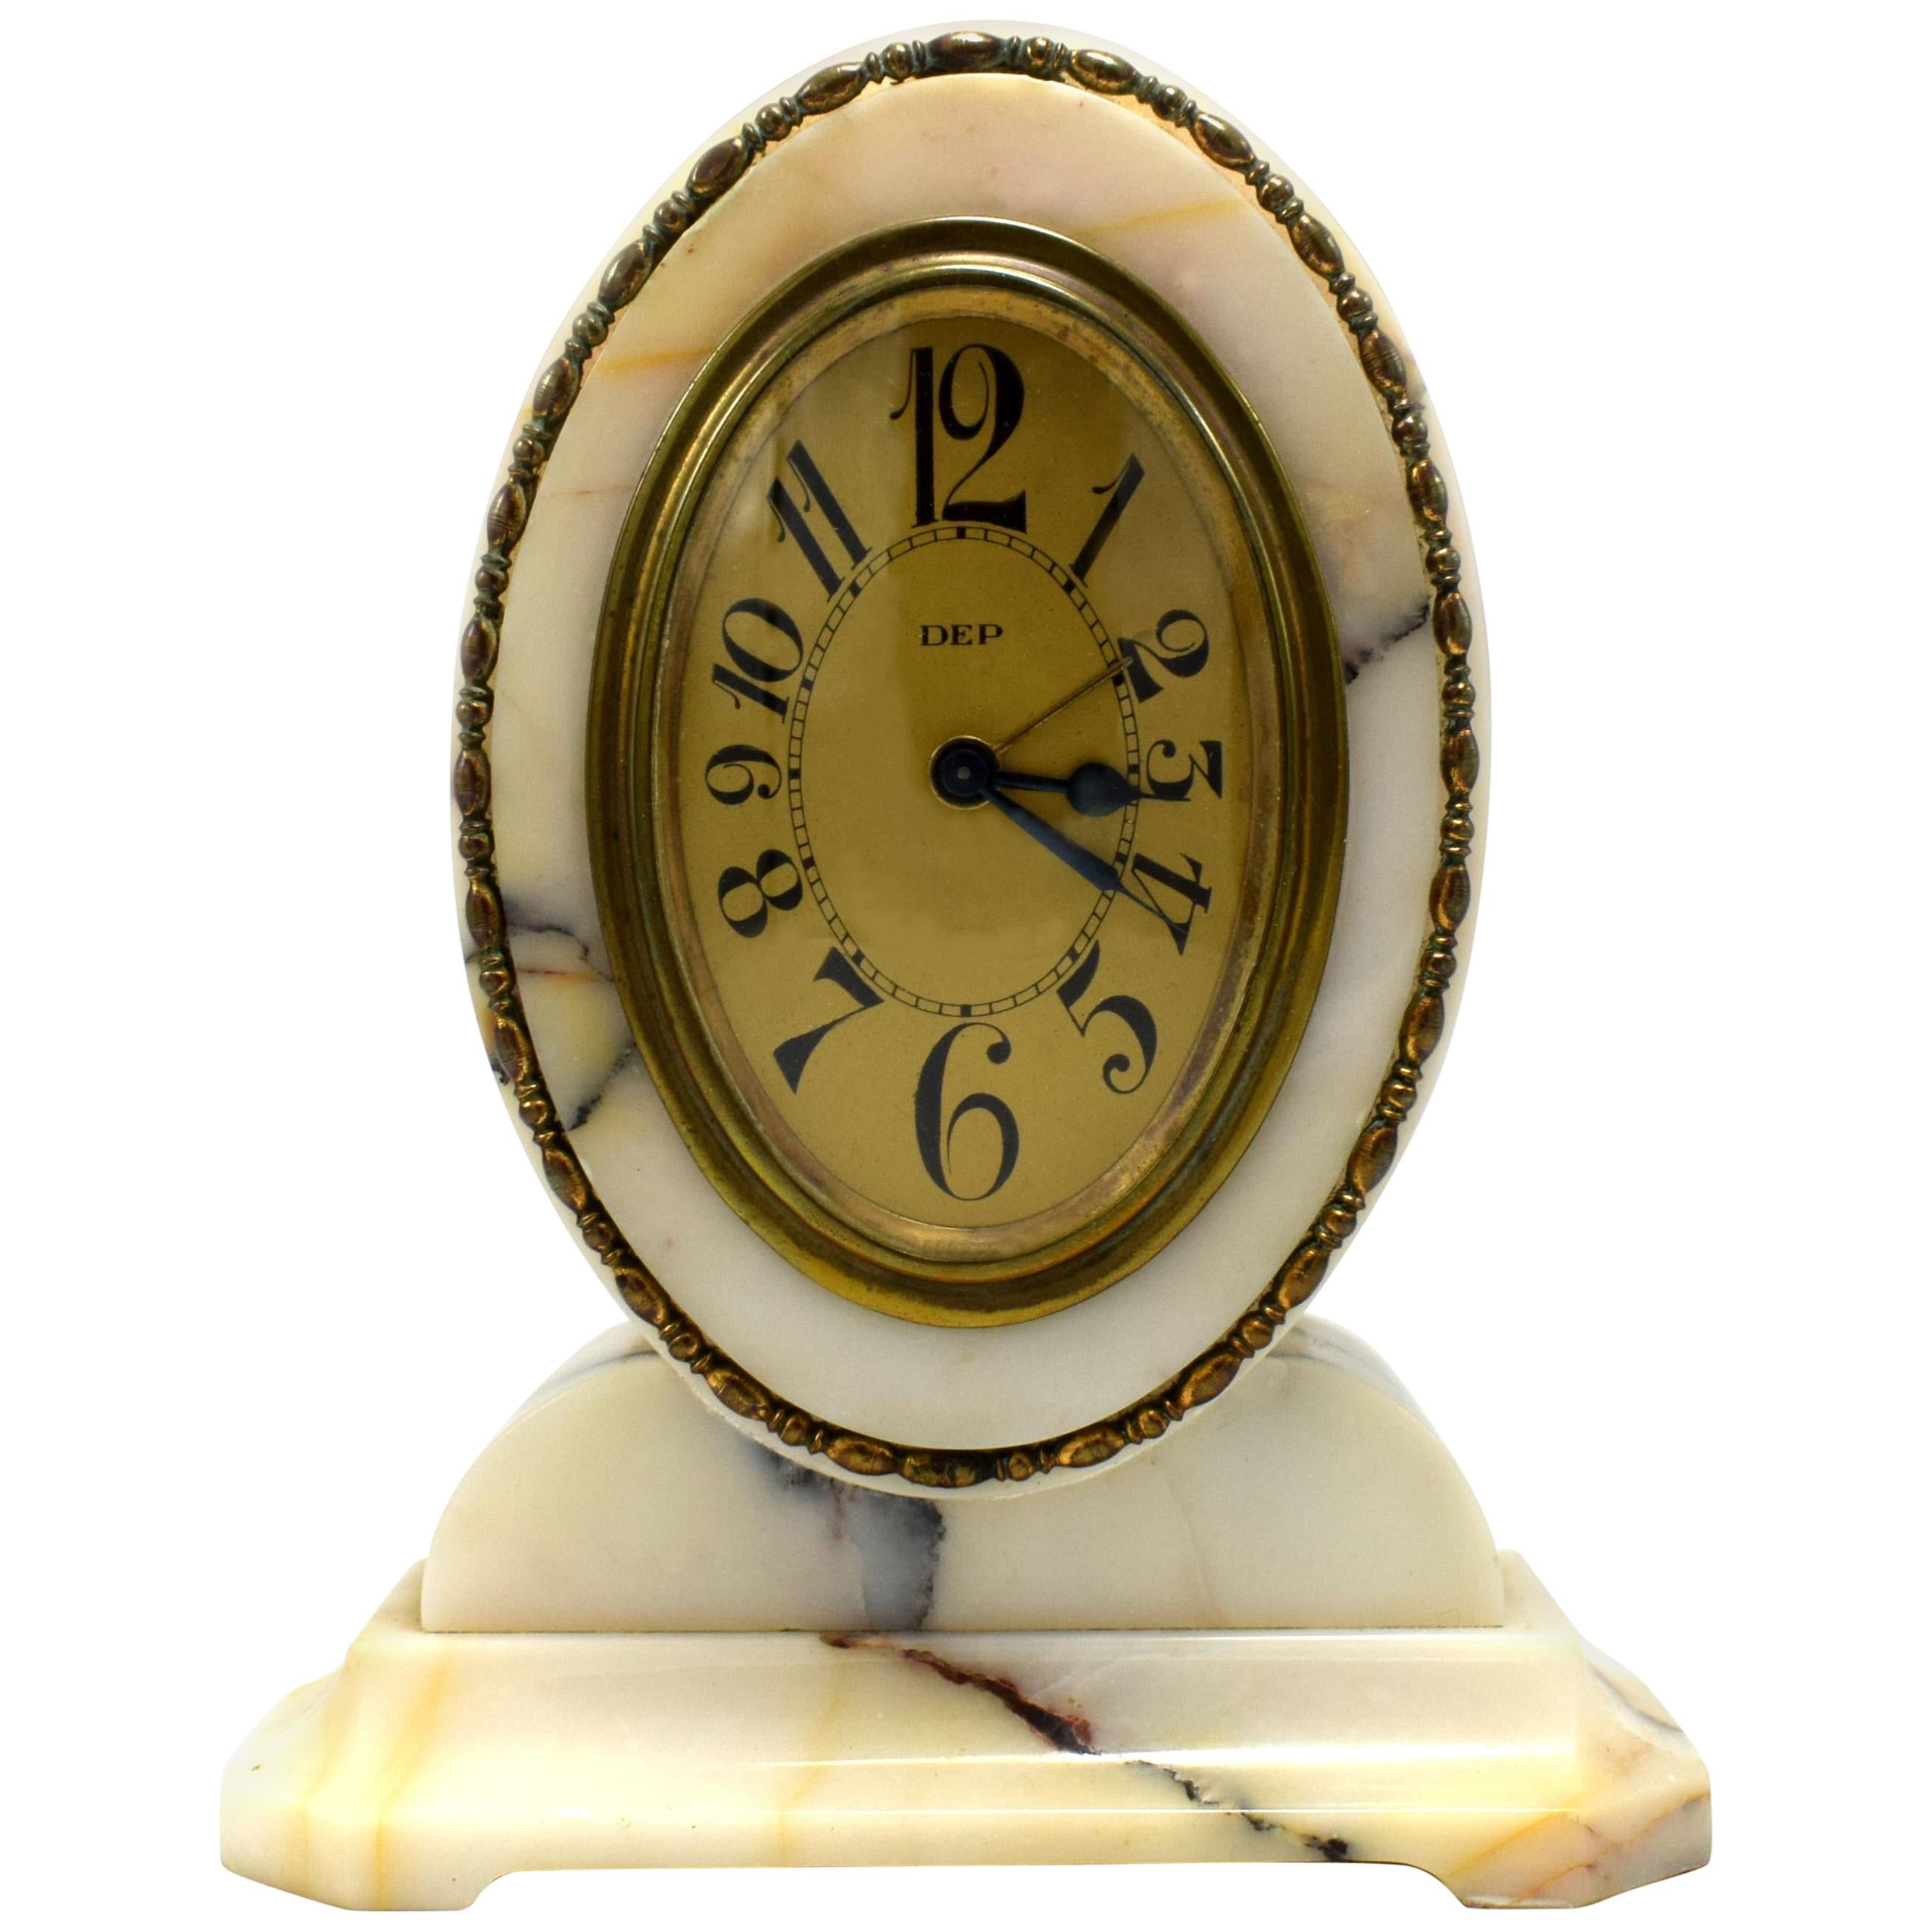 1930s Art Deco French Alarm Bedside Clock by Dep